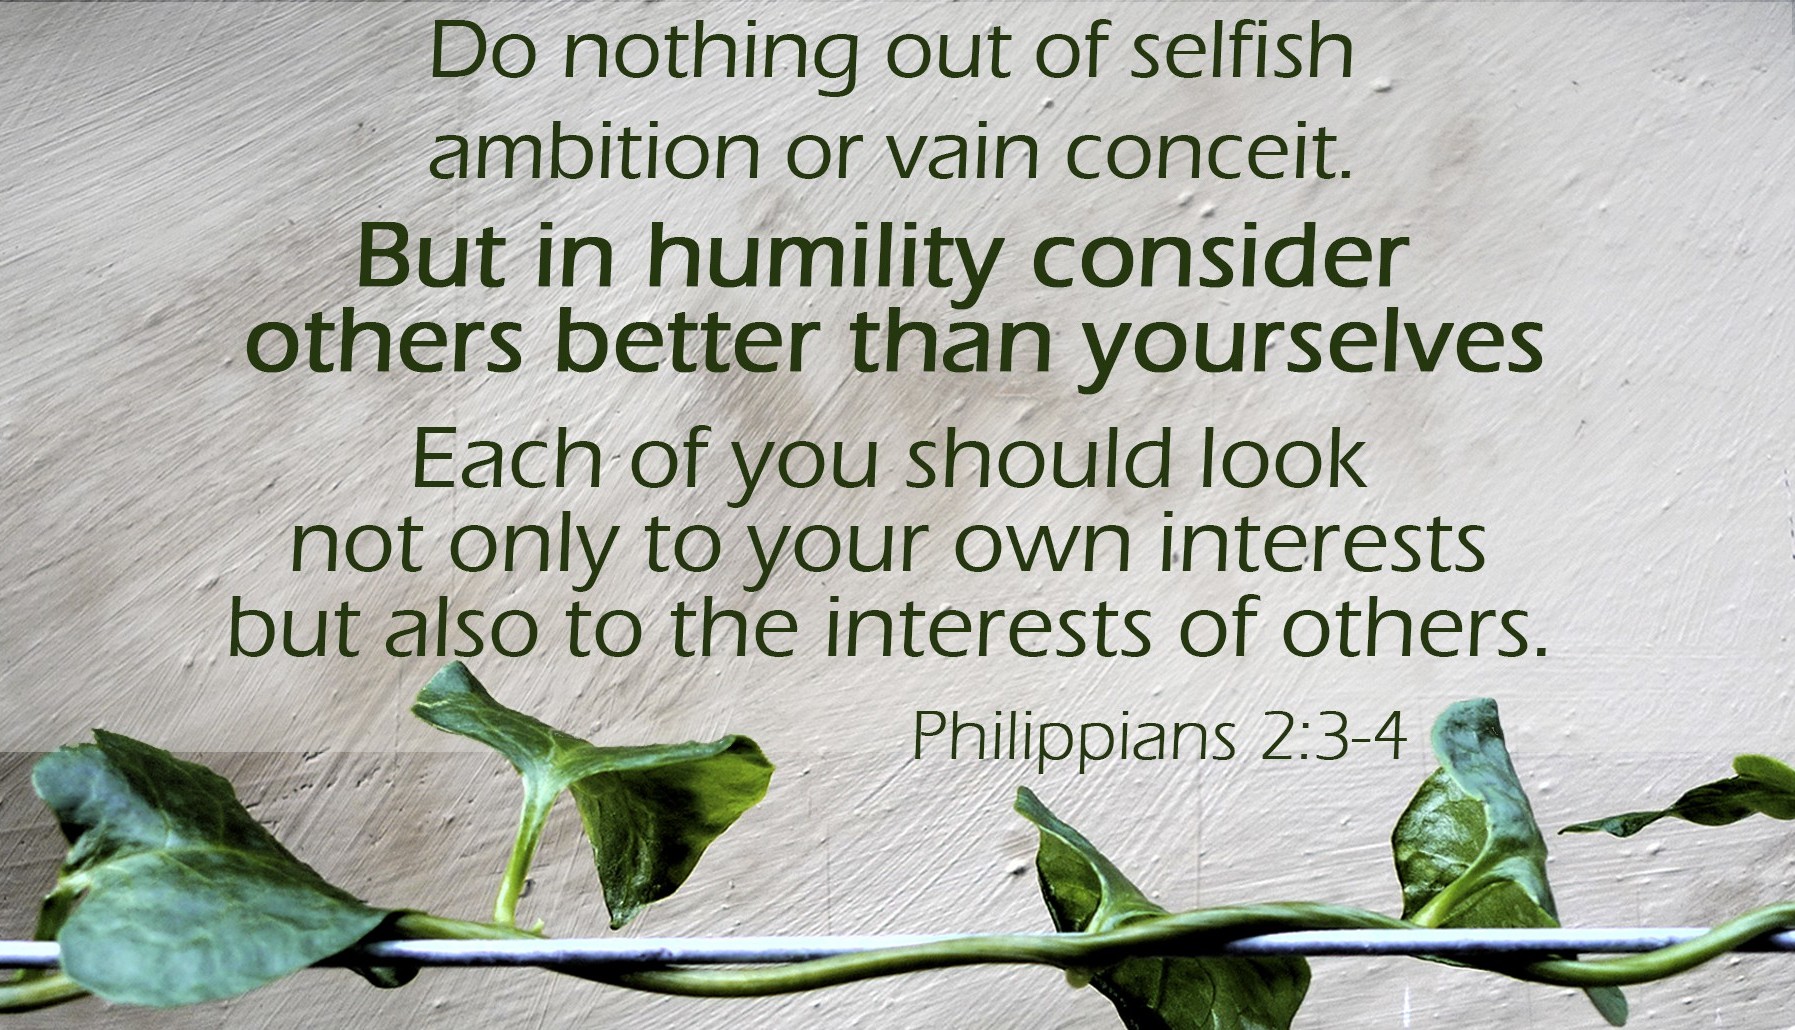 Clothing Ourselves in Humility